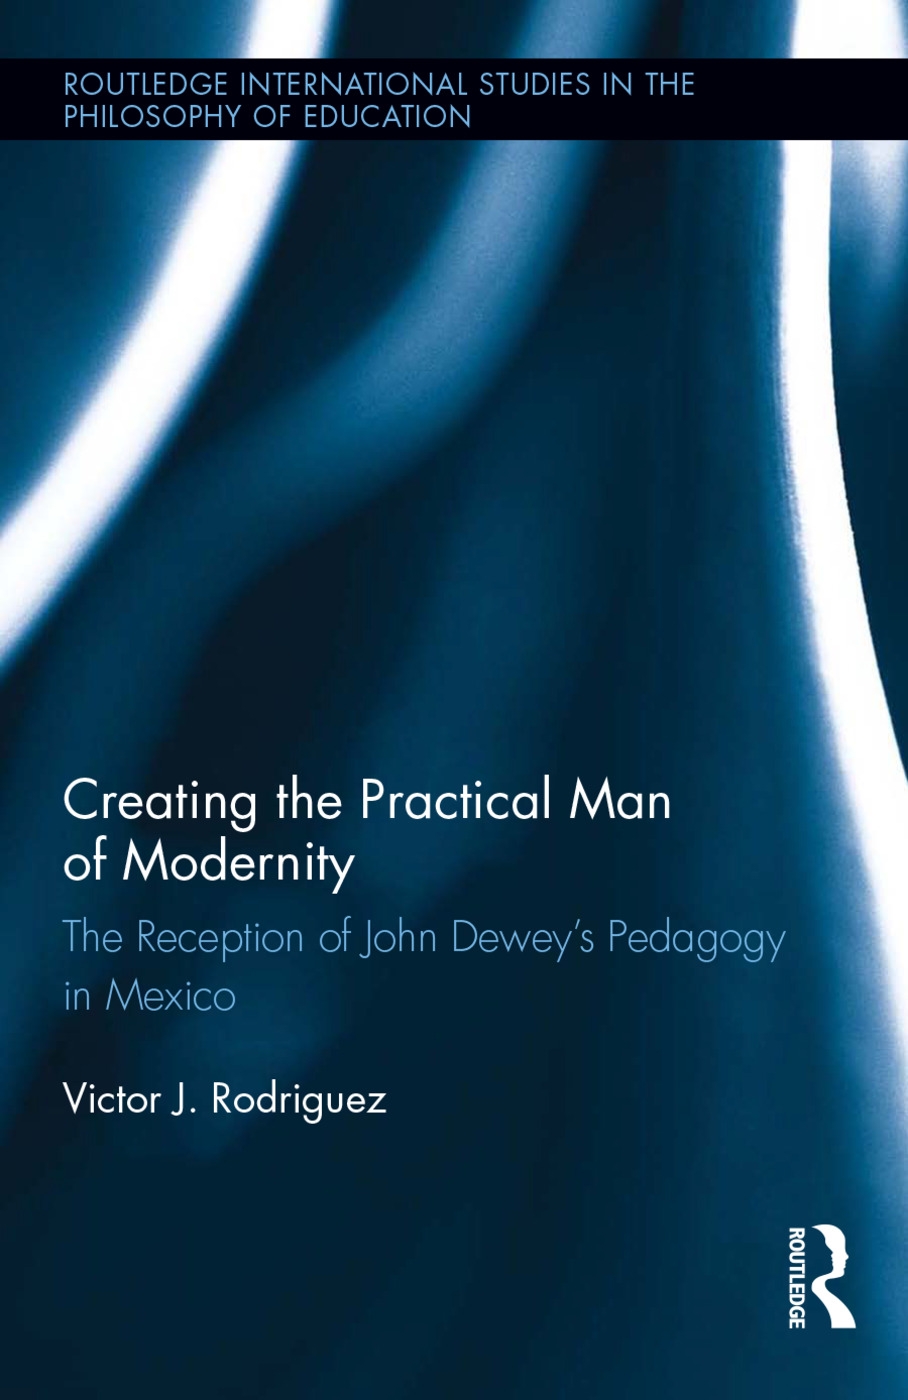 Creating the Practical Man of Modernity: The Reception of John Dewey’s Pedagogy in Mexico